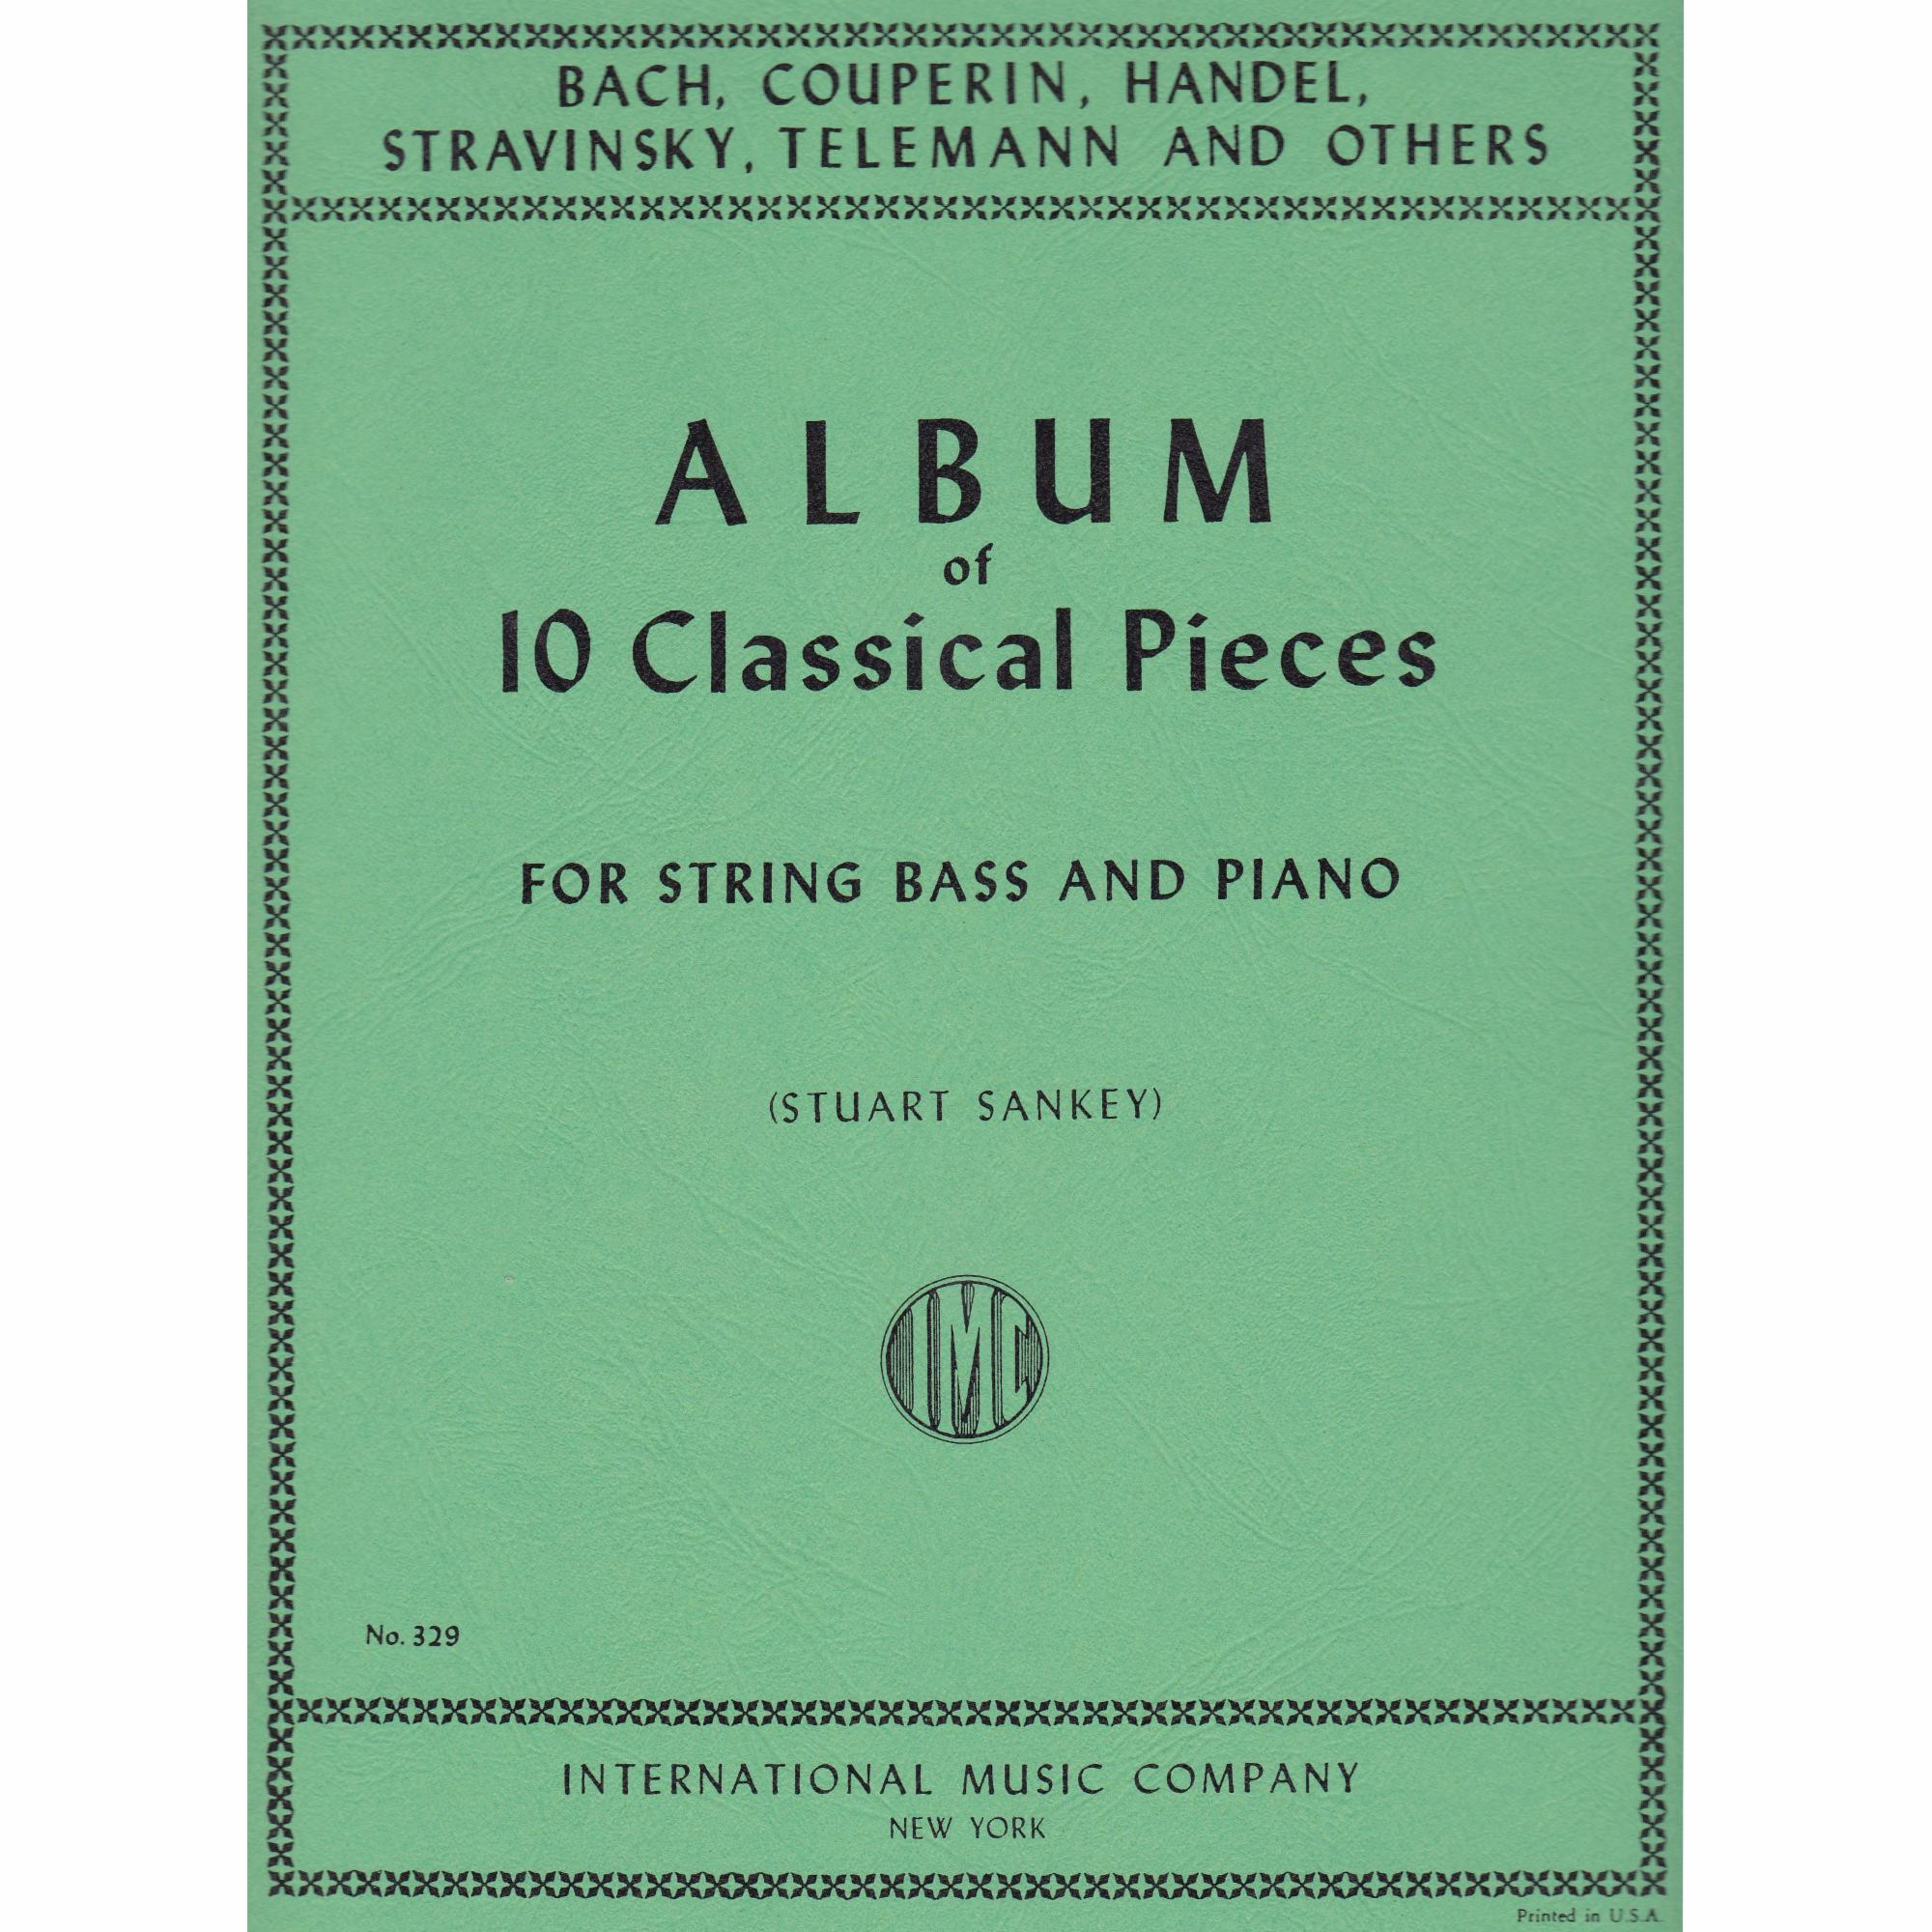 Album of Ten Classical Pieces for String Bass and Piano